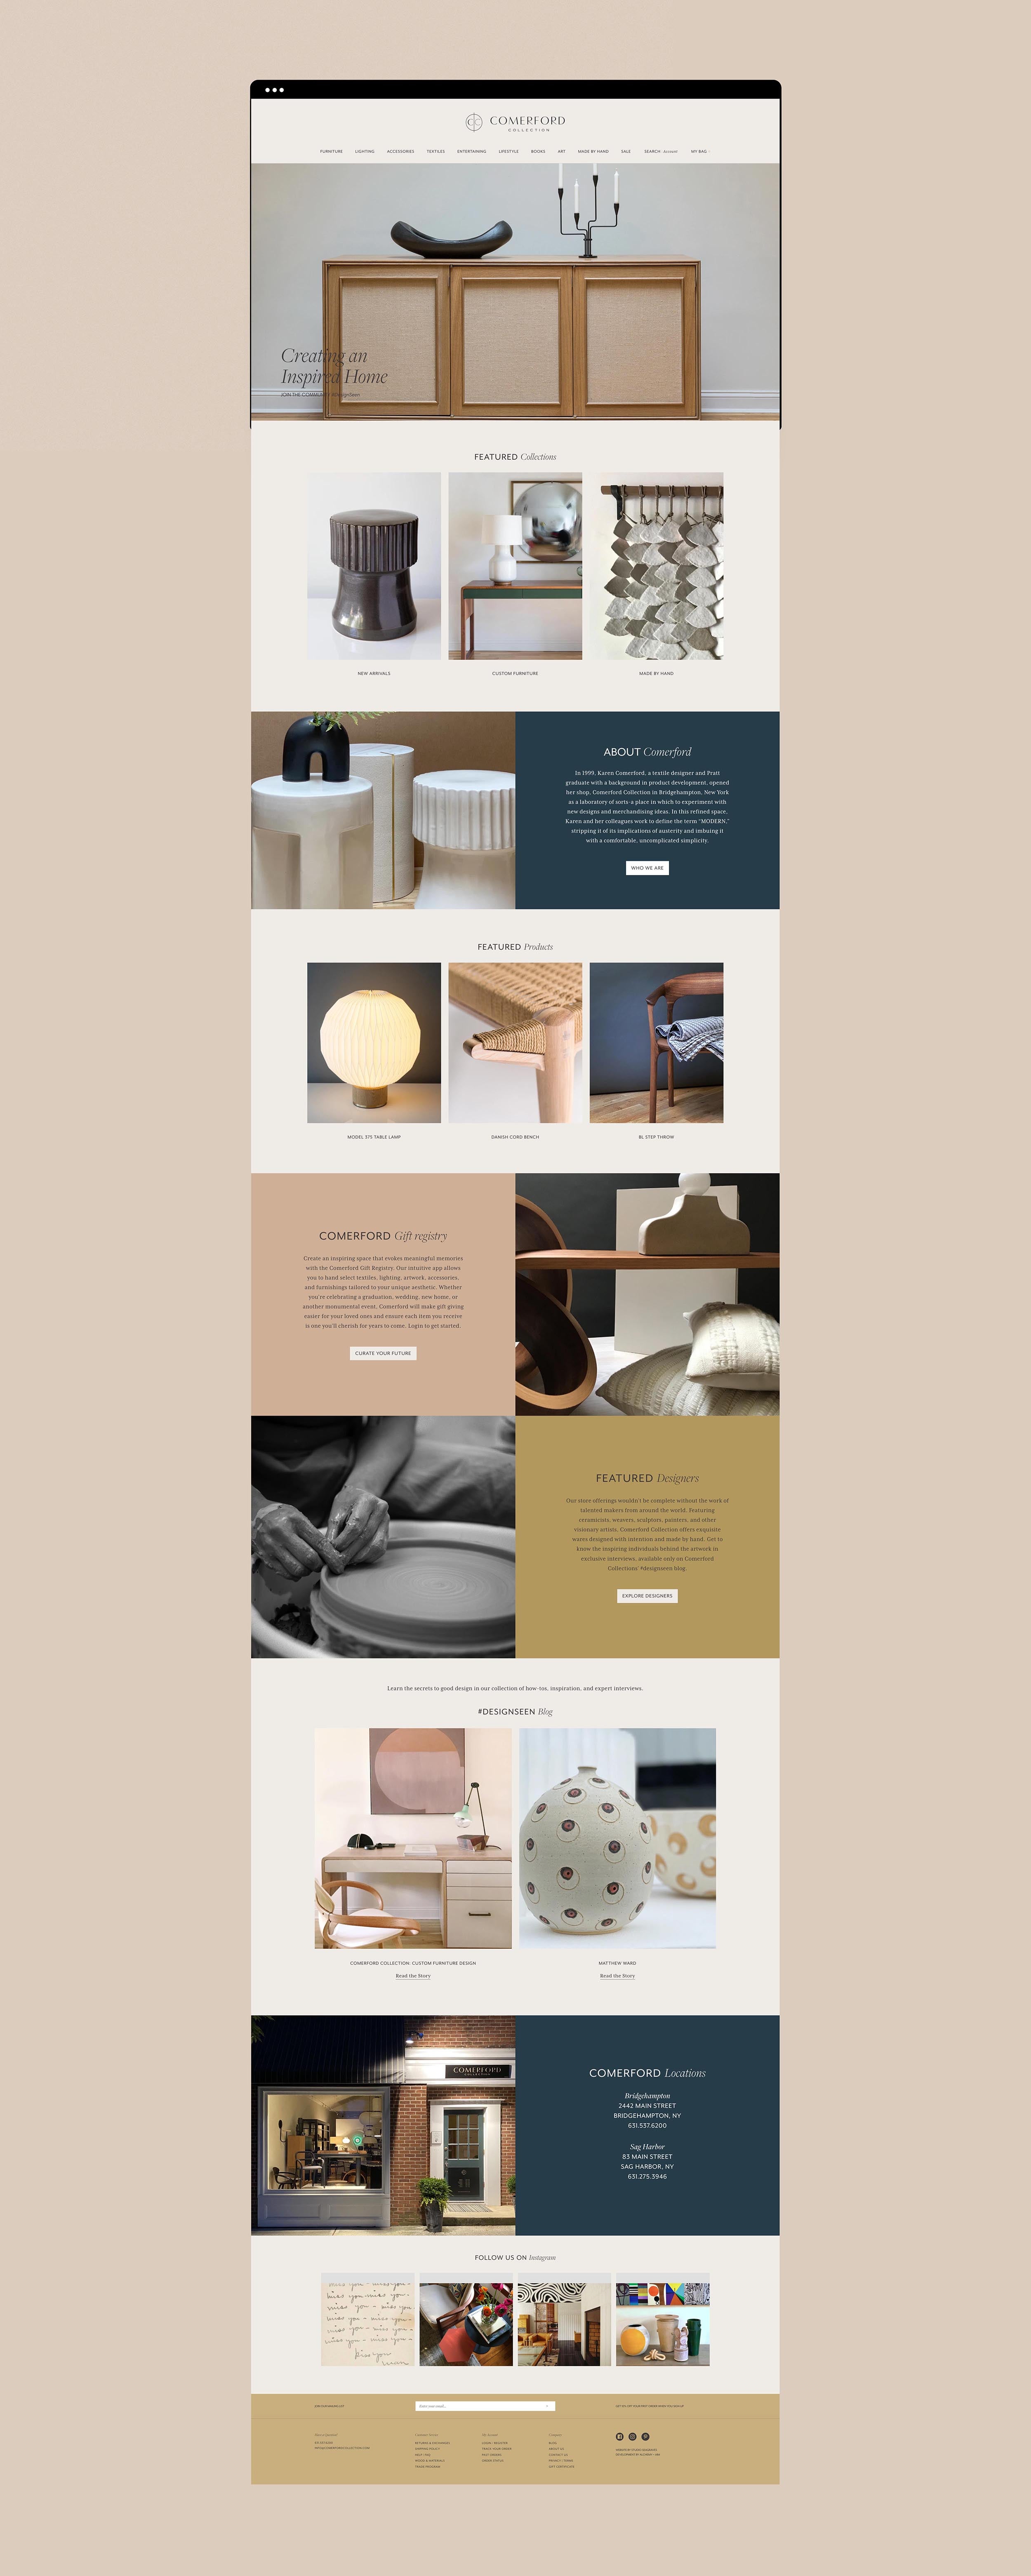 Comefored Collection Website and Branding Studio Seagraves Design Agency St. Louis Missouri Chesterfield Store Signage  Packaging Open Box Experience  Copywriting Brand Voice  Shopify E-commerce